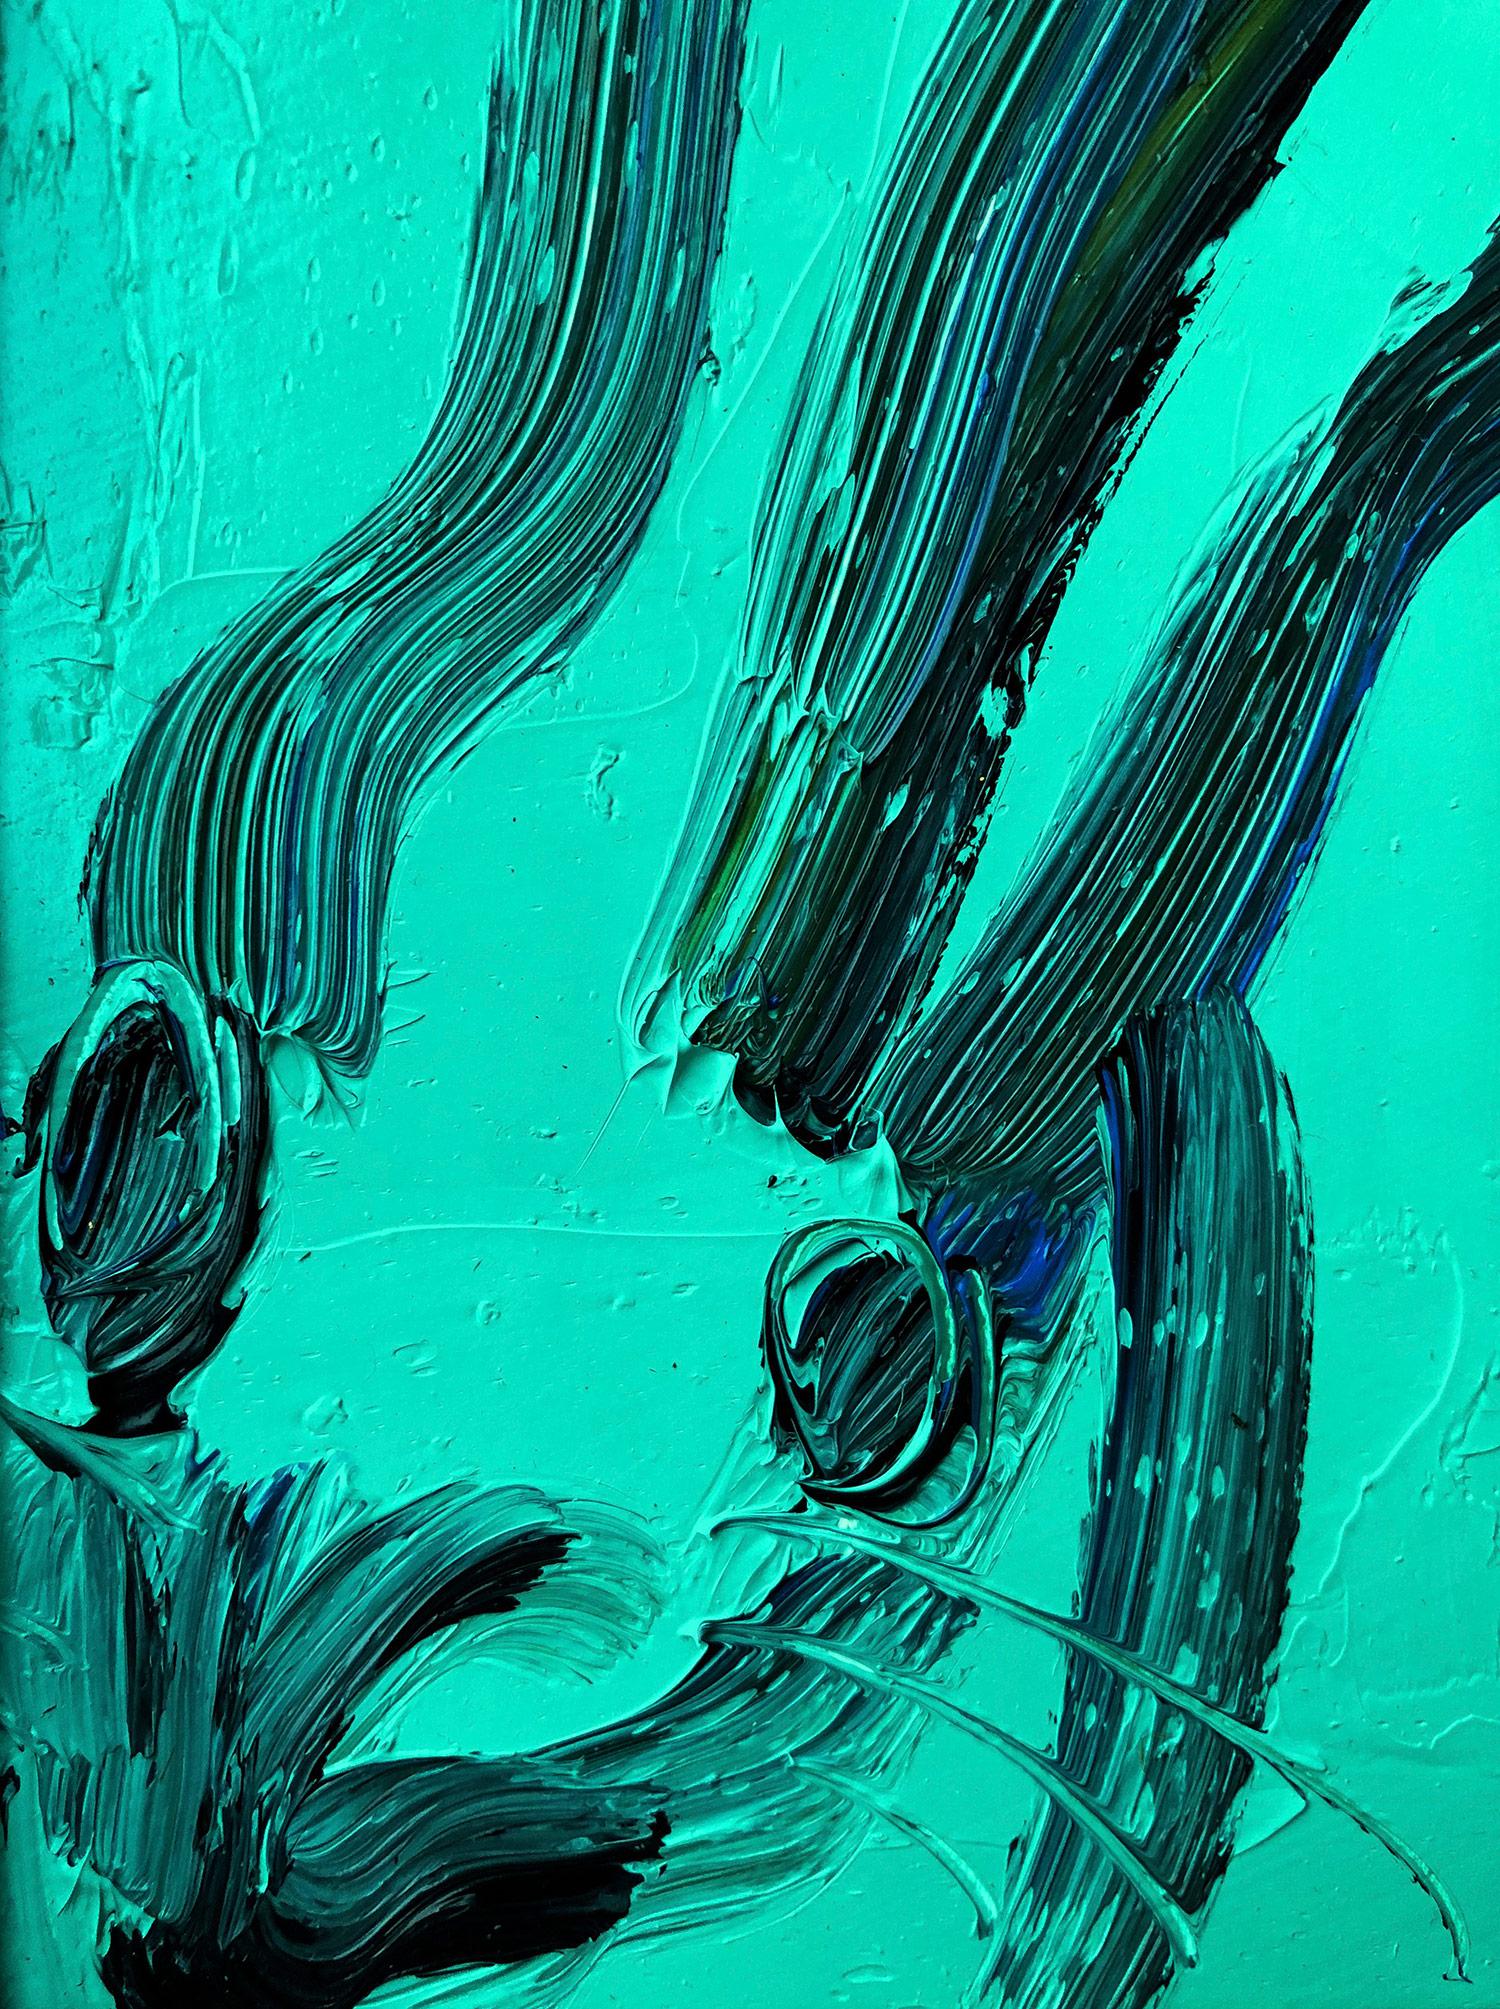 Untitled (Bunny on Cadet Turquoise) - Contemporary Painting by Hunt Slonem